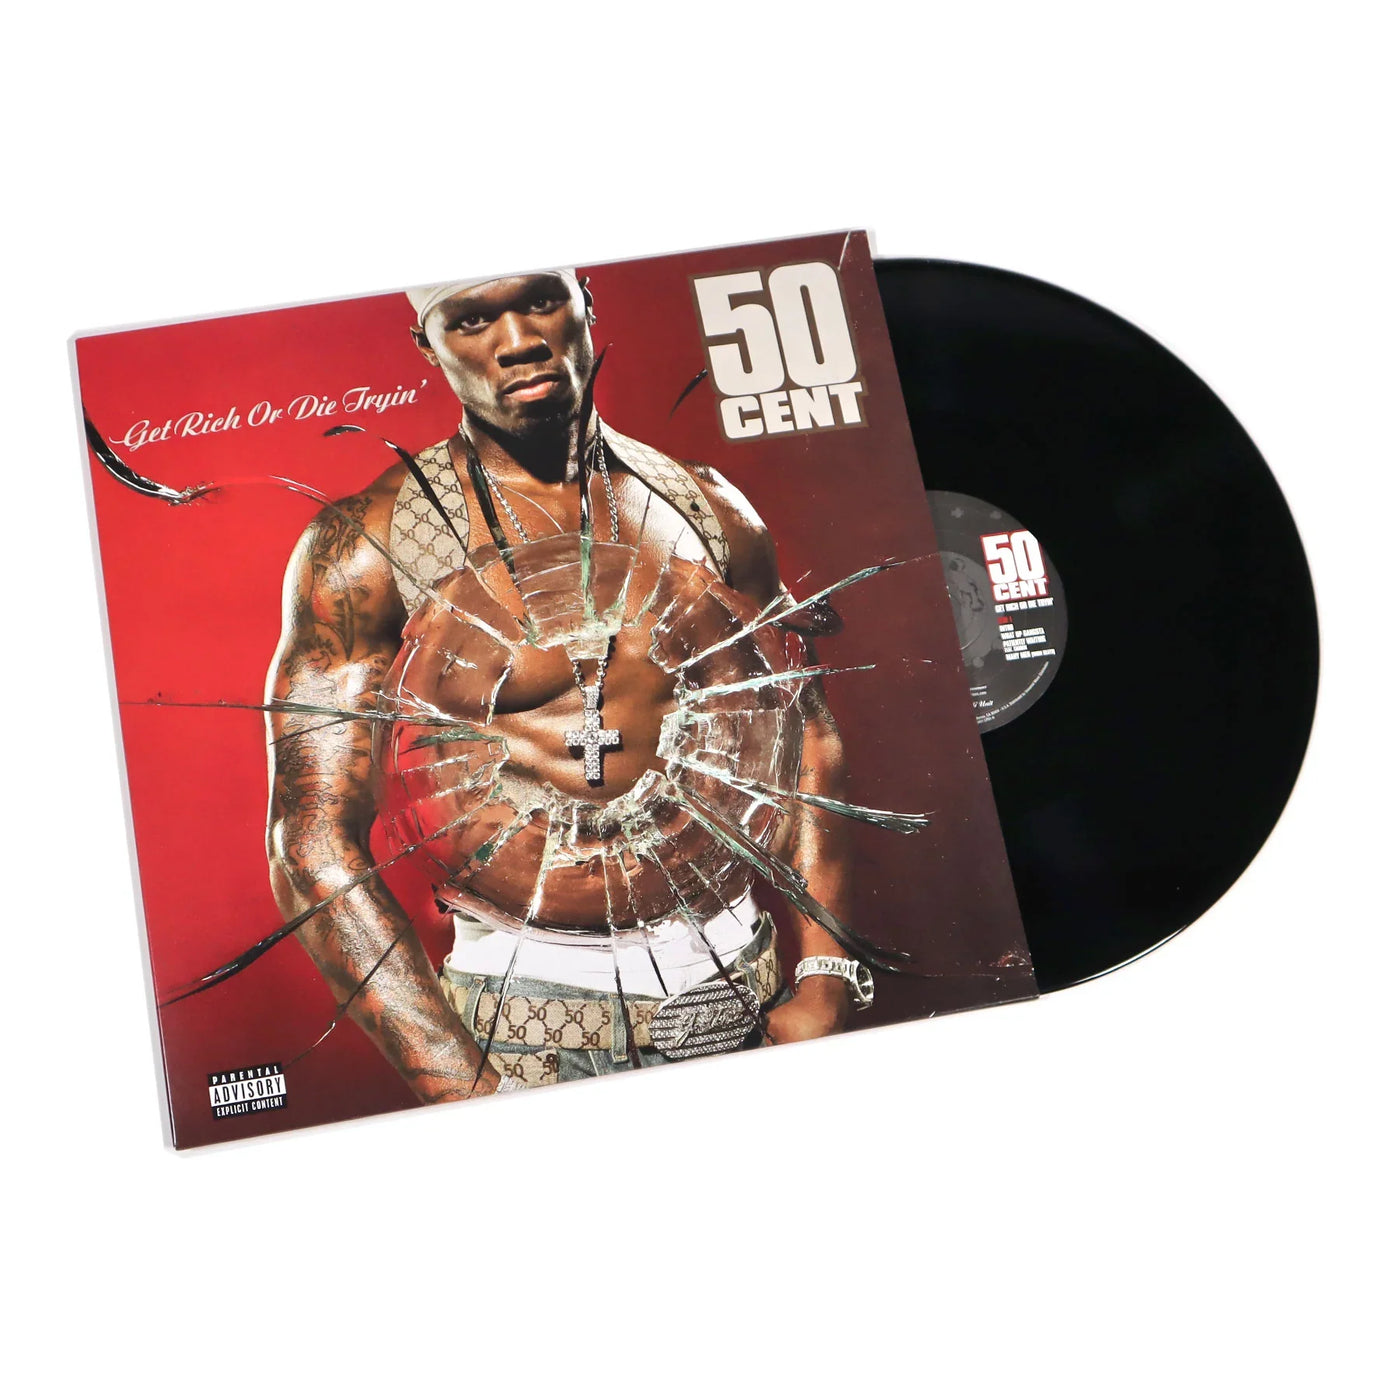 NEW/SEALED! 50 Cent - Get Rich Or Die Tryin' [Explicit Content] (2 Lp's)